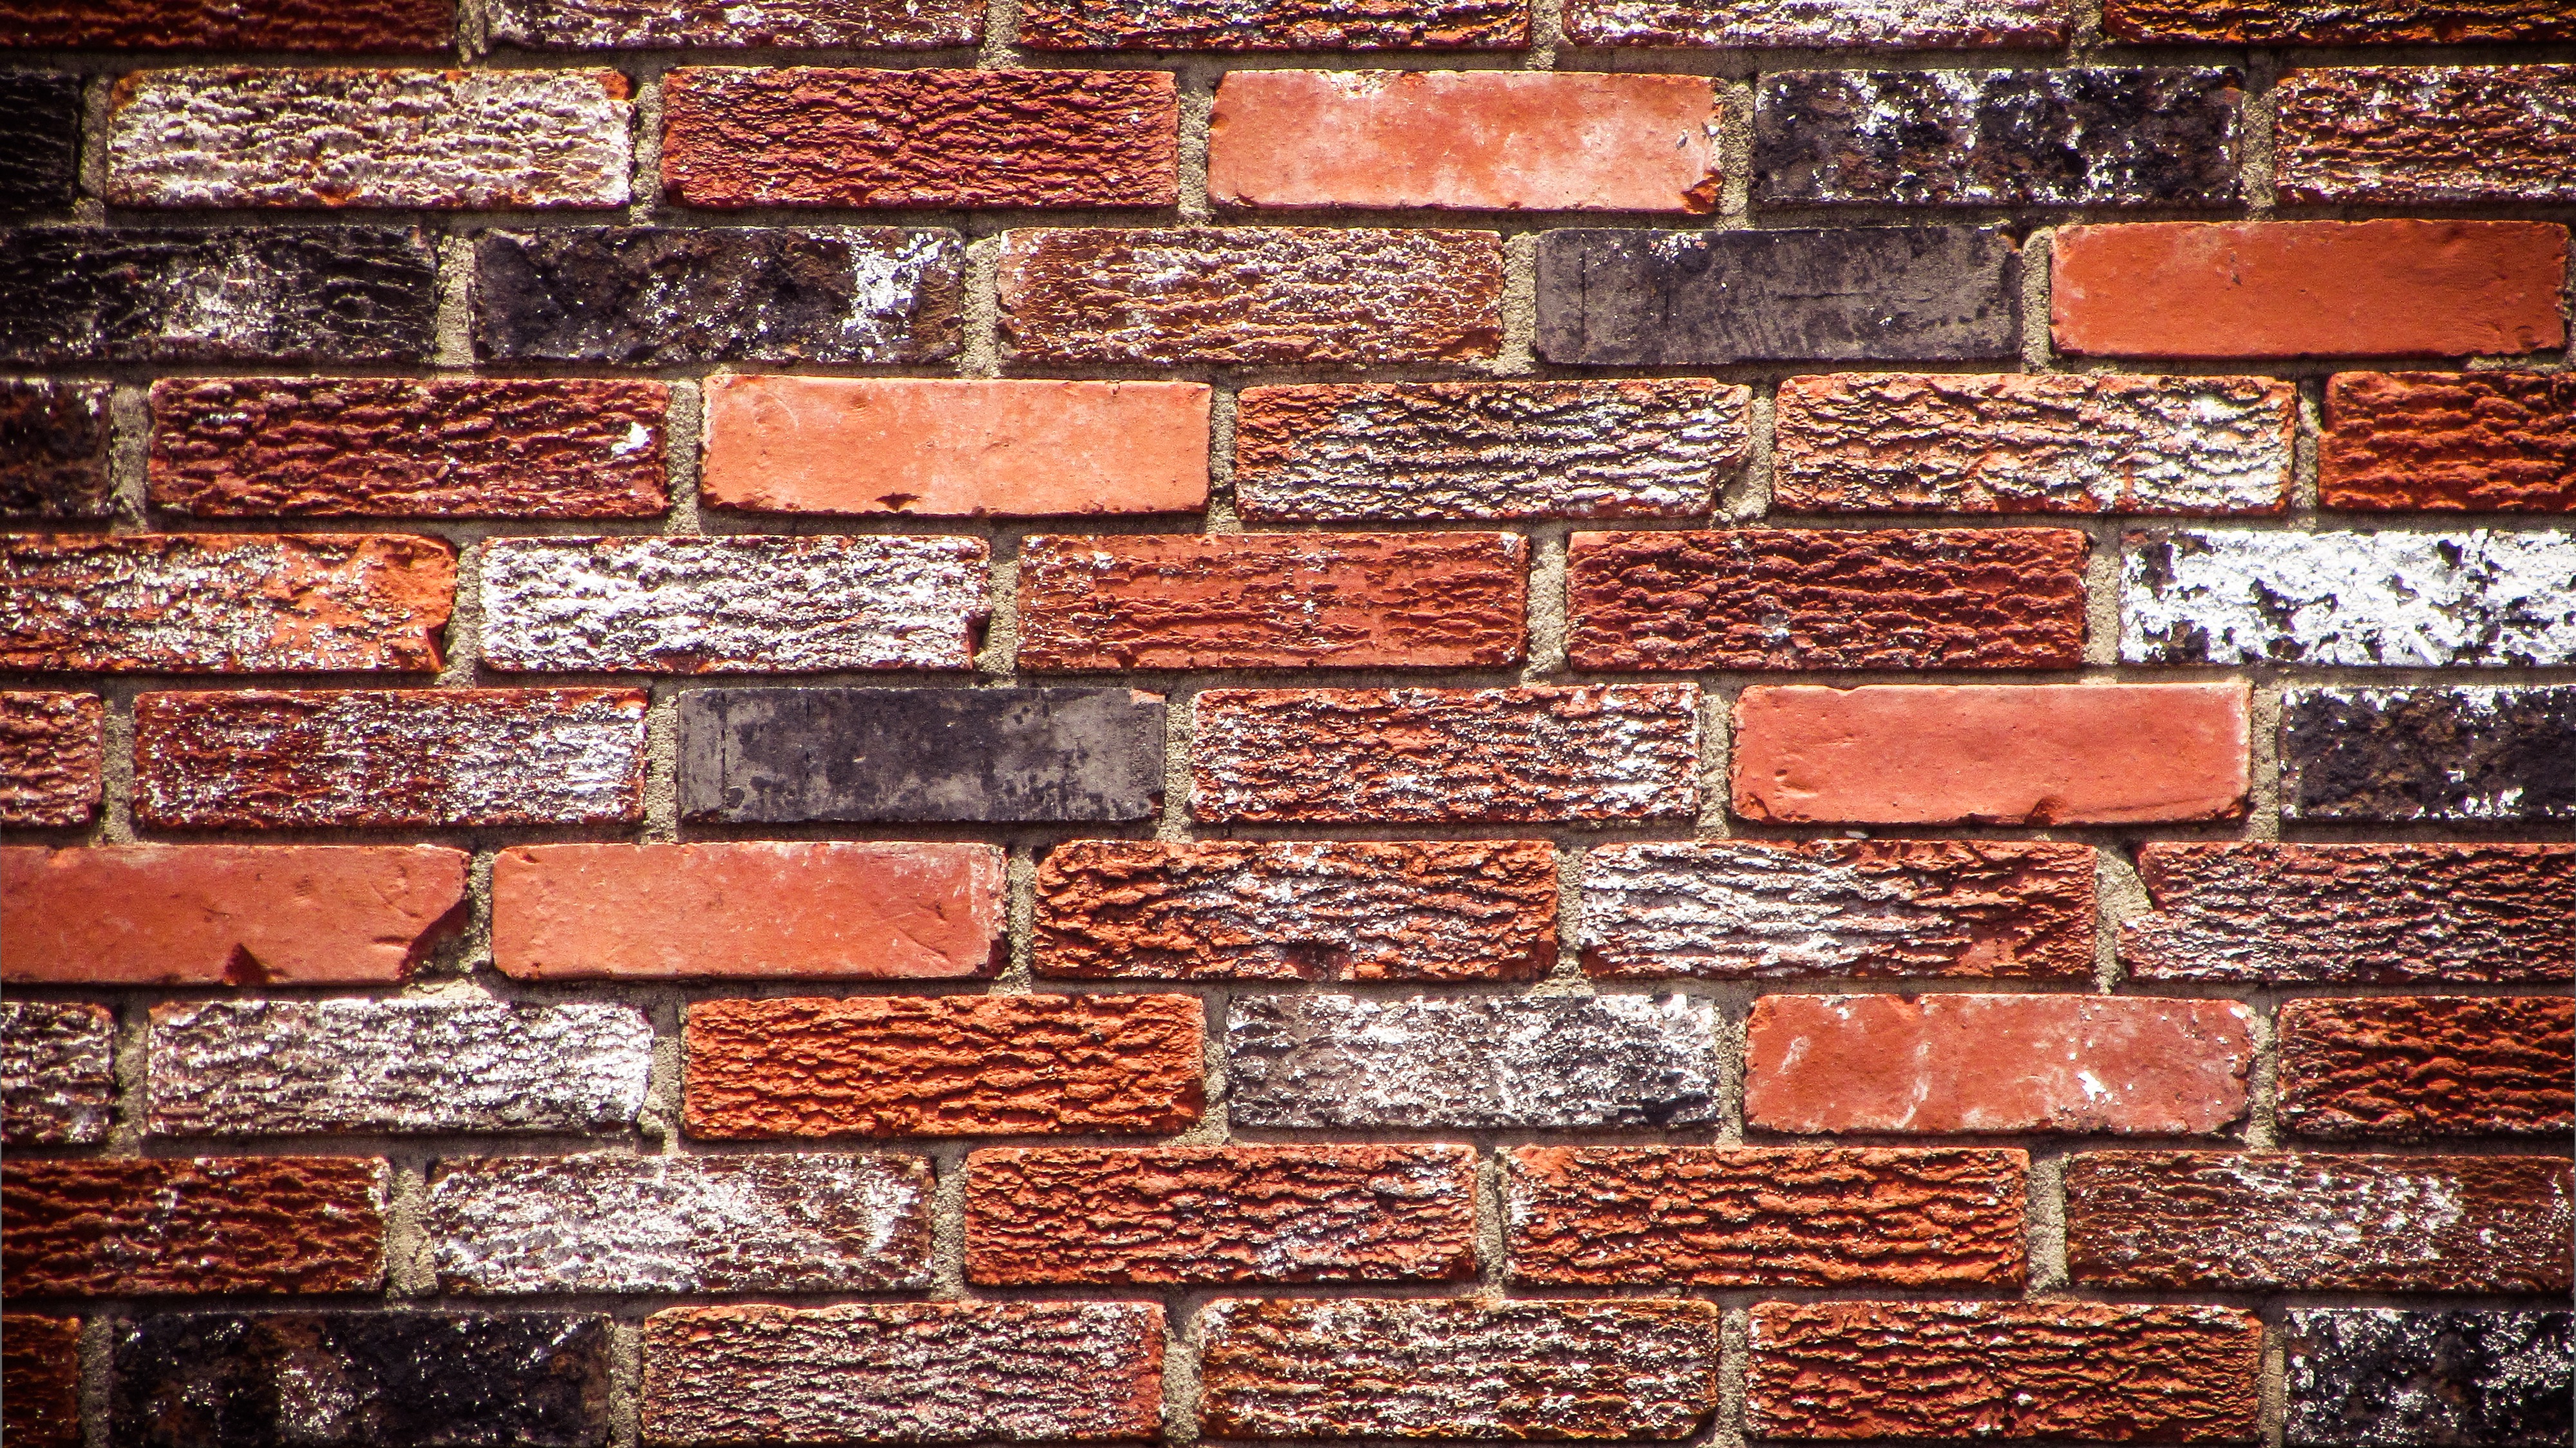 Download wallpapers brown brickwall, 4k, brown bricks, bricks textures,  brick wall, bricks, wall, colorful bricks, identical bricks, bricks  background, brown stone background for desktop free. Pictures for desktop  free